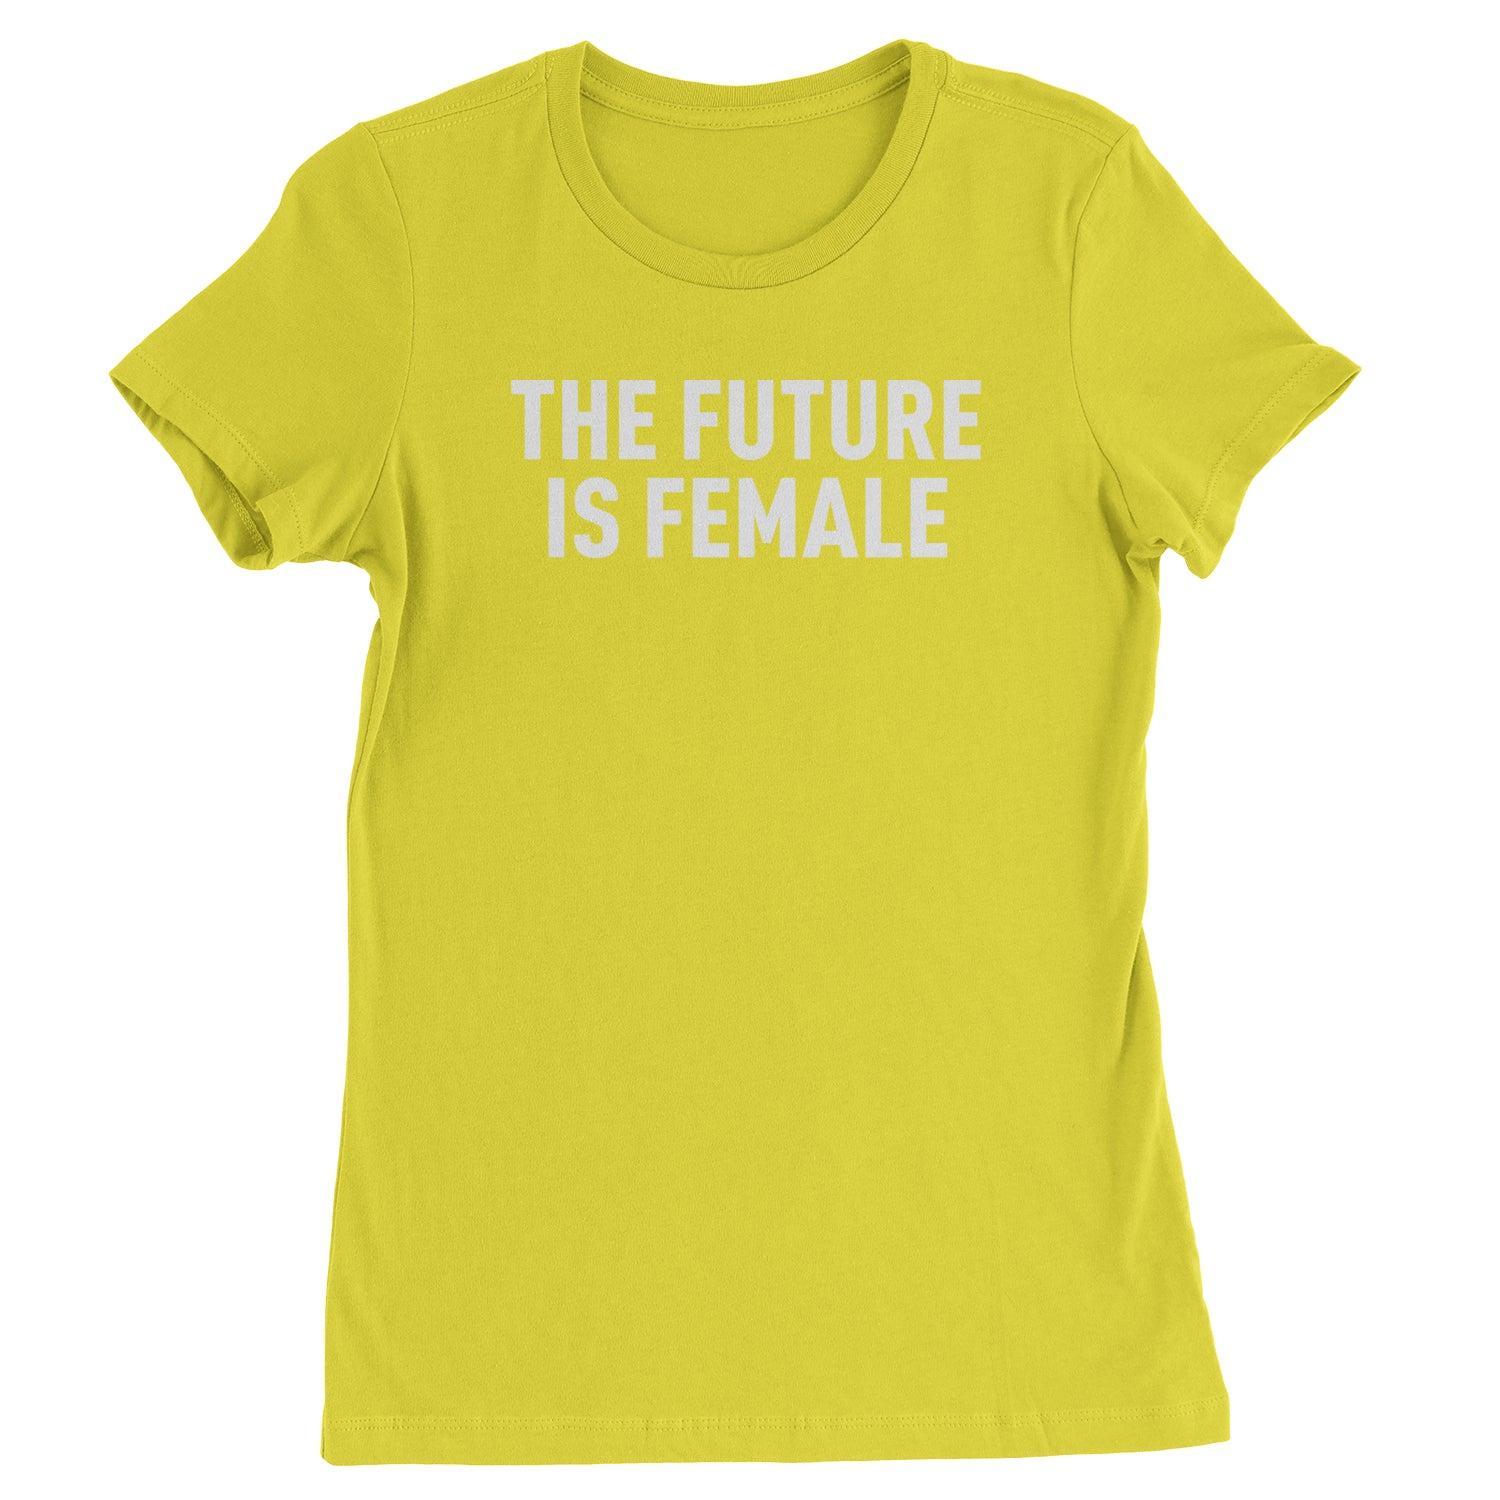 The Future Is Female Feminism Womens T-shirt female, feminism, feminist, femme, future, is, liberation, suffrage, the by Expression Tees